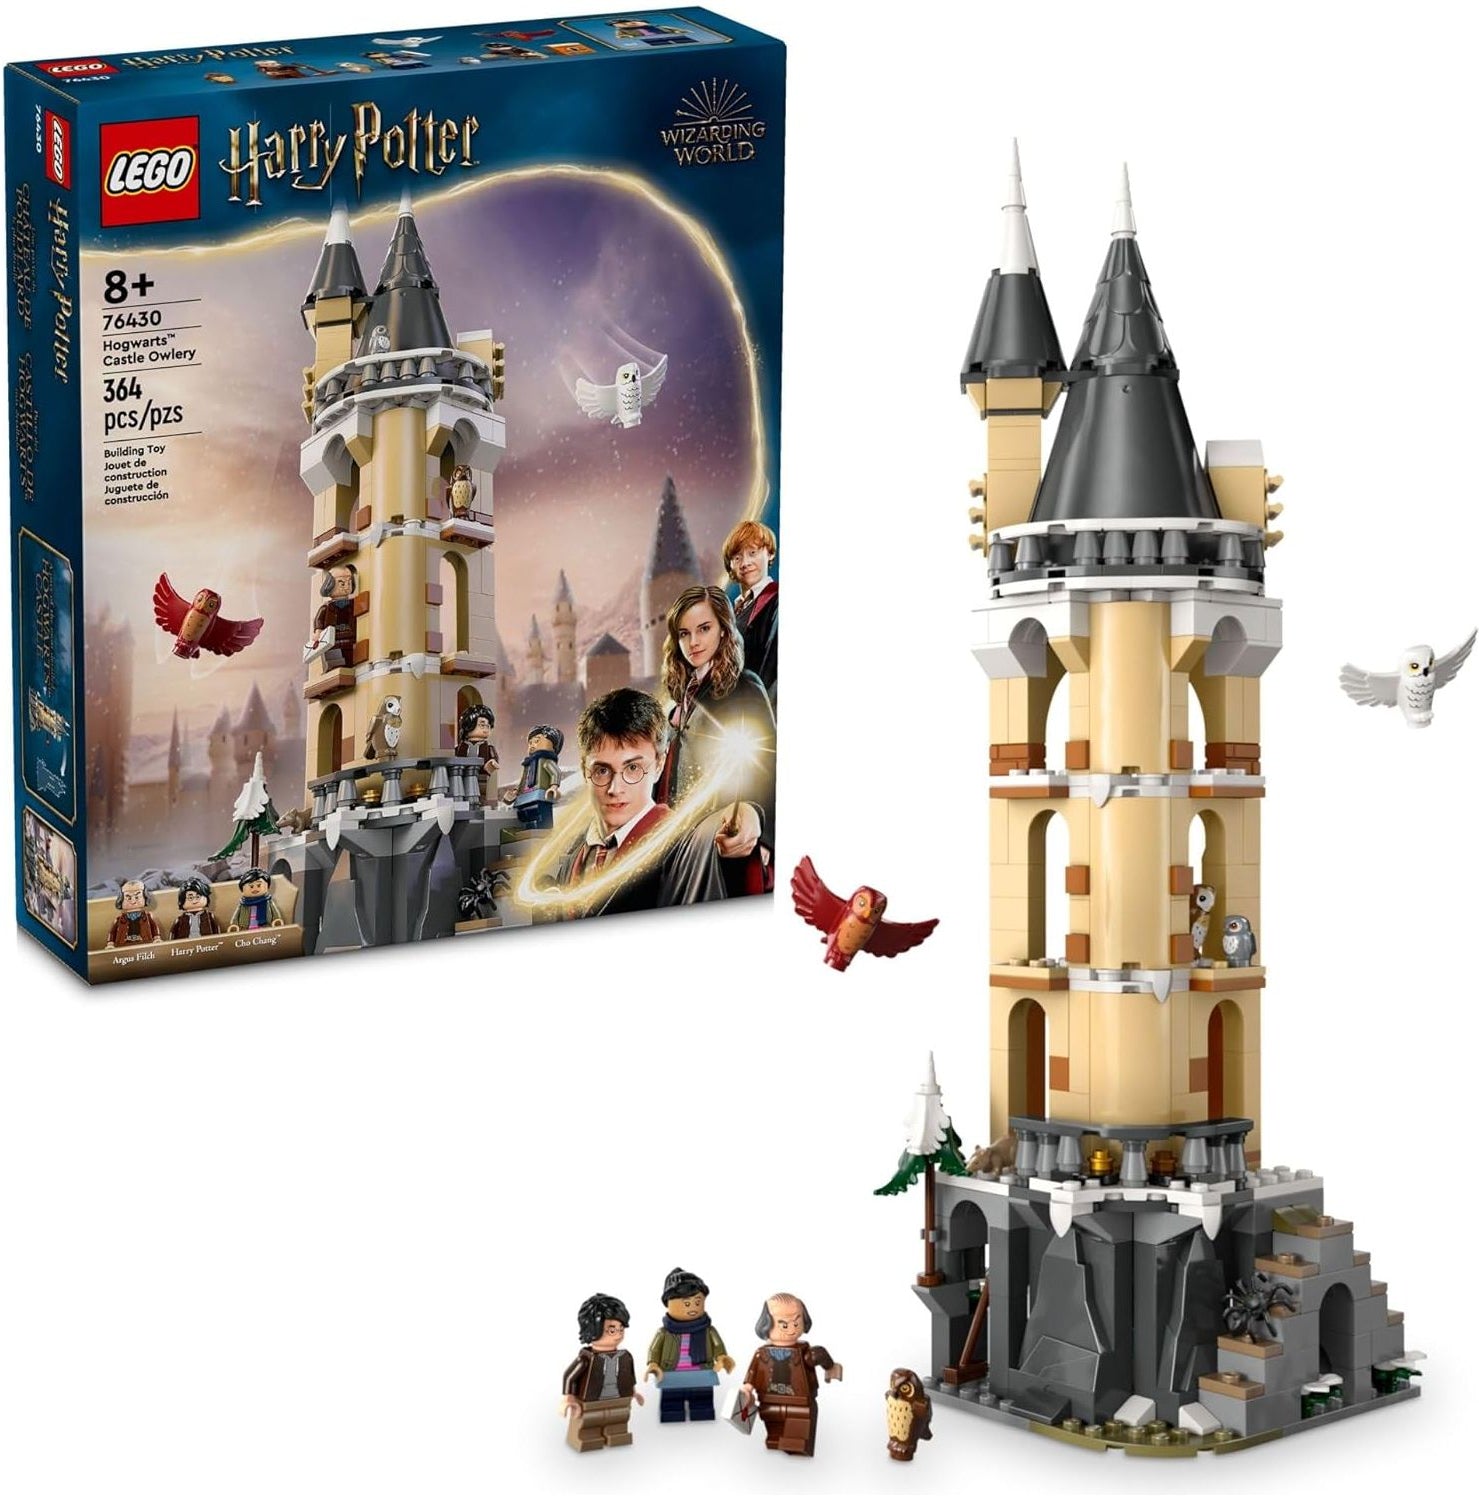 LEGO 76430 Harry Potter Hogwarts Castle Owlery Toy, Wizarding World Fantasy Toy for Girls and Boys, Harry Potter Castle Playset with 3 Characters.